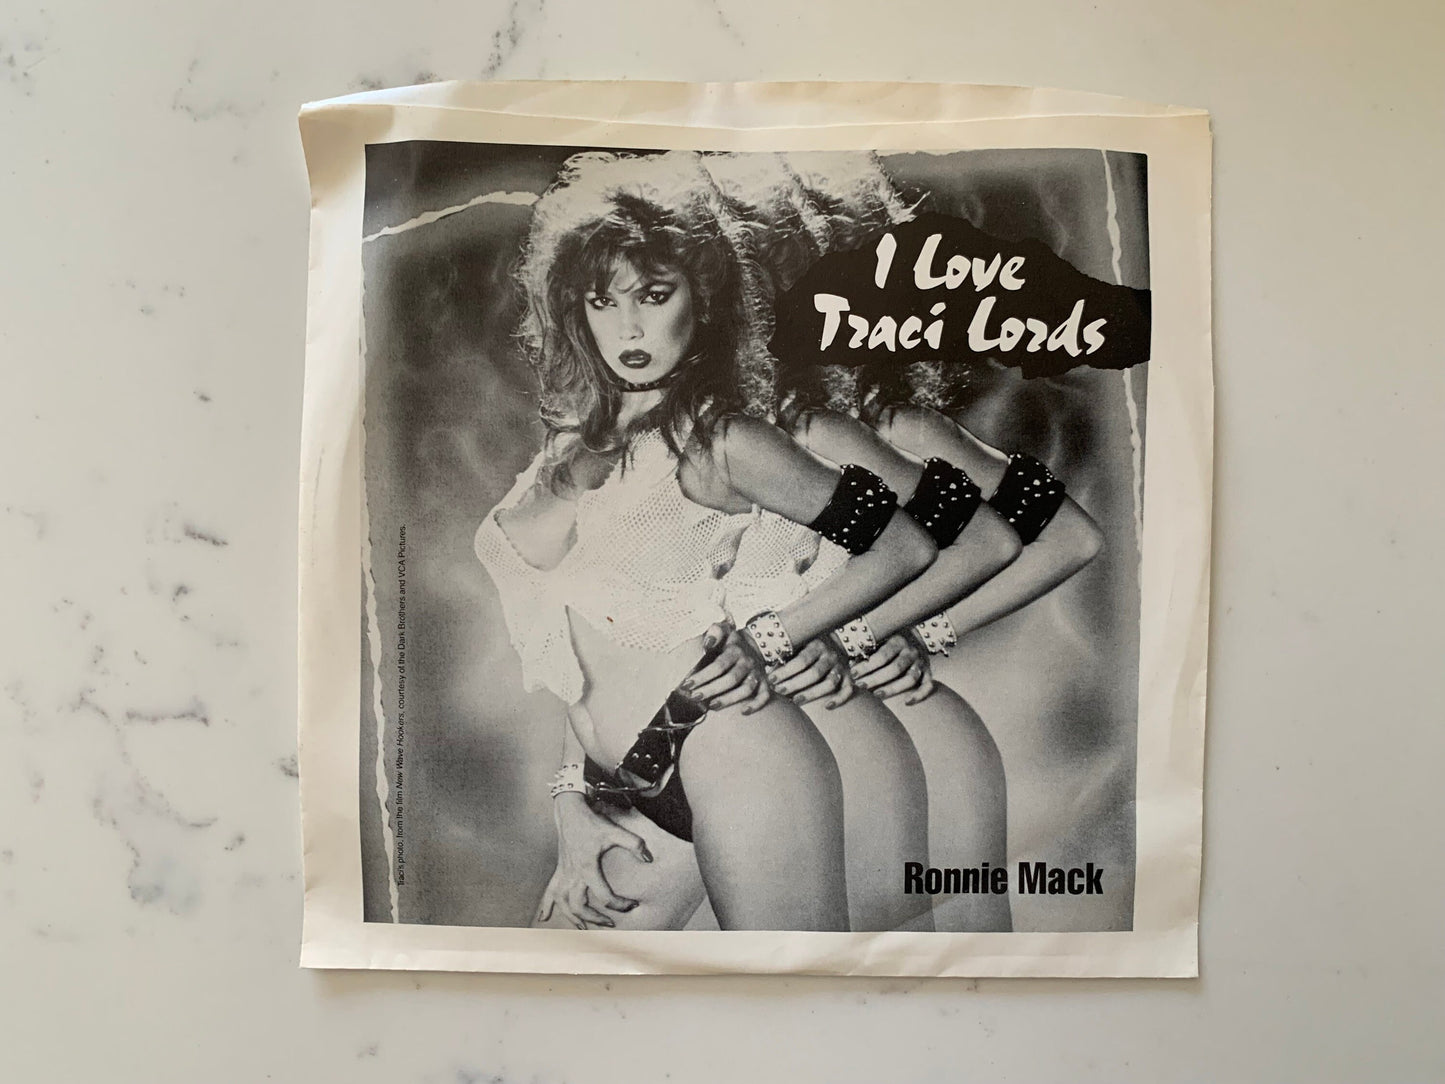 Ronnie Mack I Love Traci Lords 7" 45 RPM Single Lonesome Town – LTS-112/LTS 111 1986 Original Rockabilly, Country, Vintage Vinyl Records